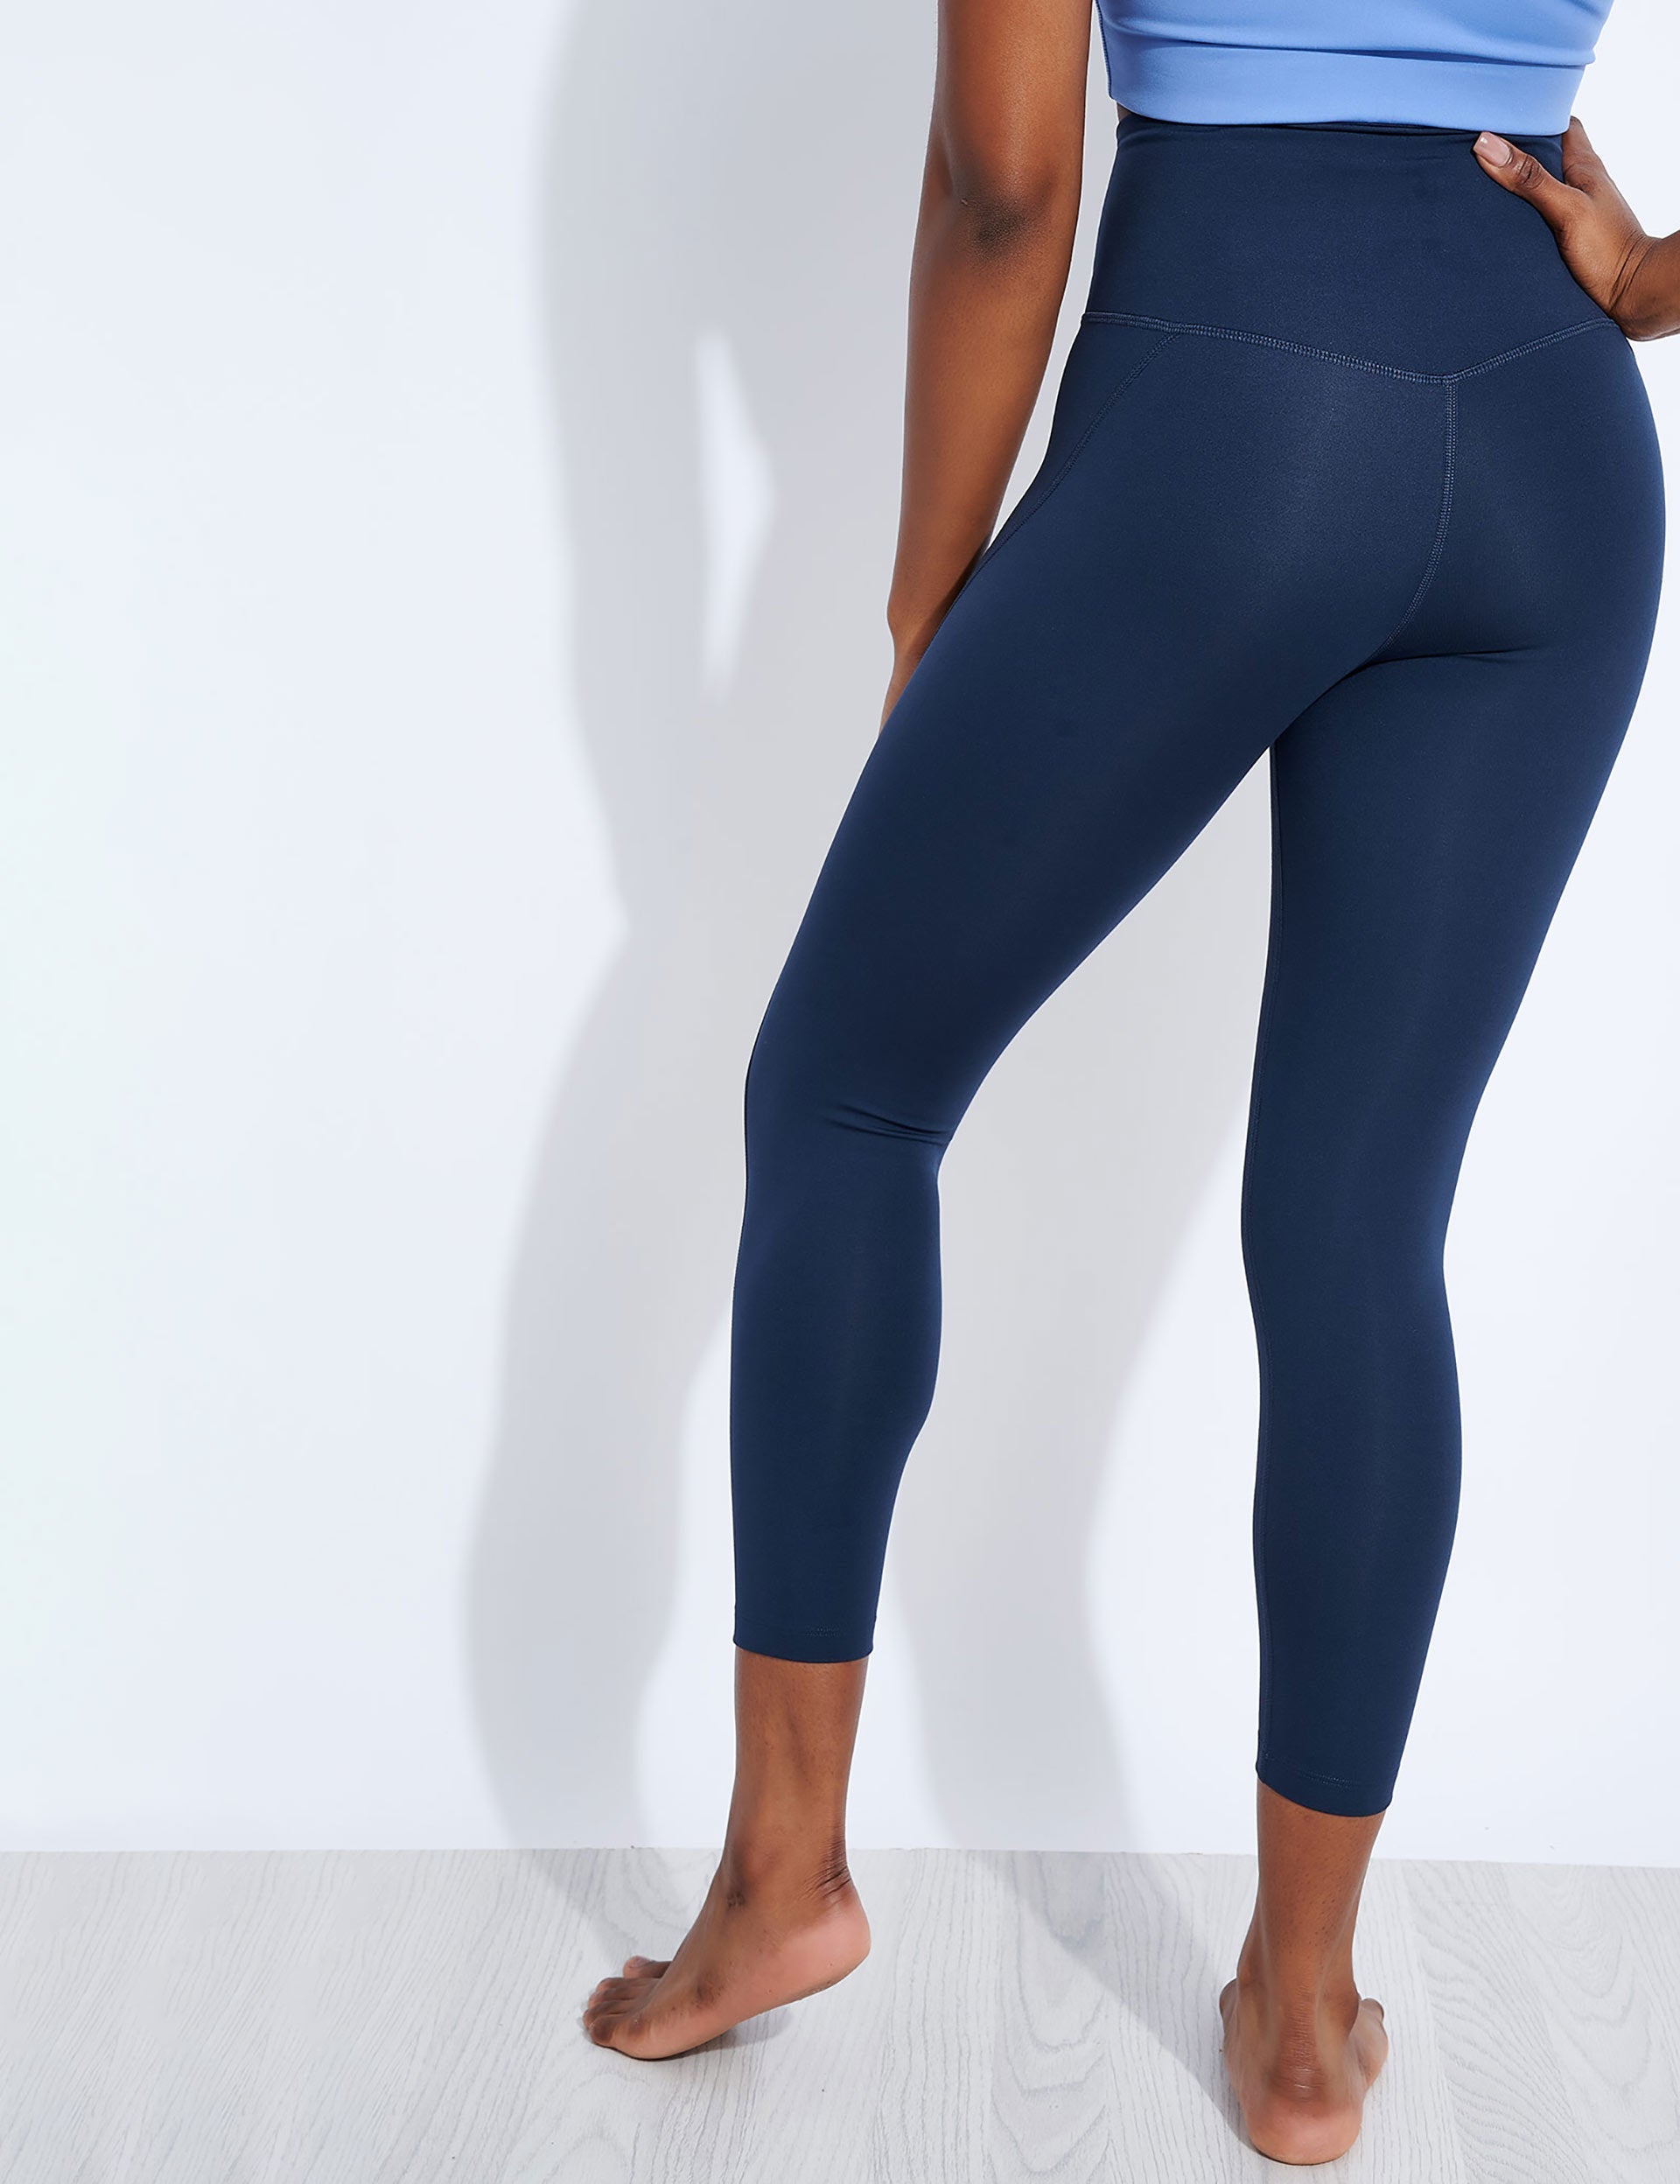 Girlfriend Collective Compressive High Waisted 7/8 Legging - Midnightimage3- The Sports Edit